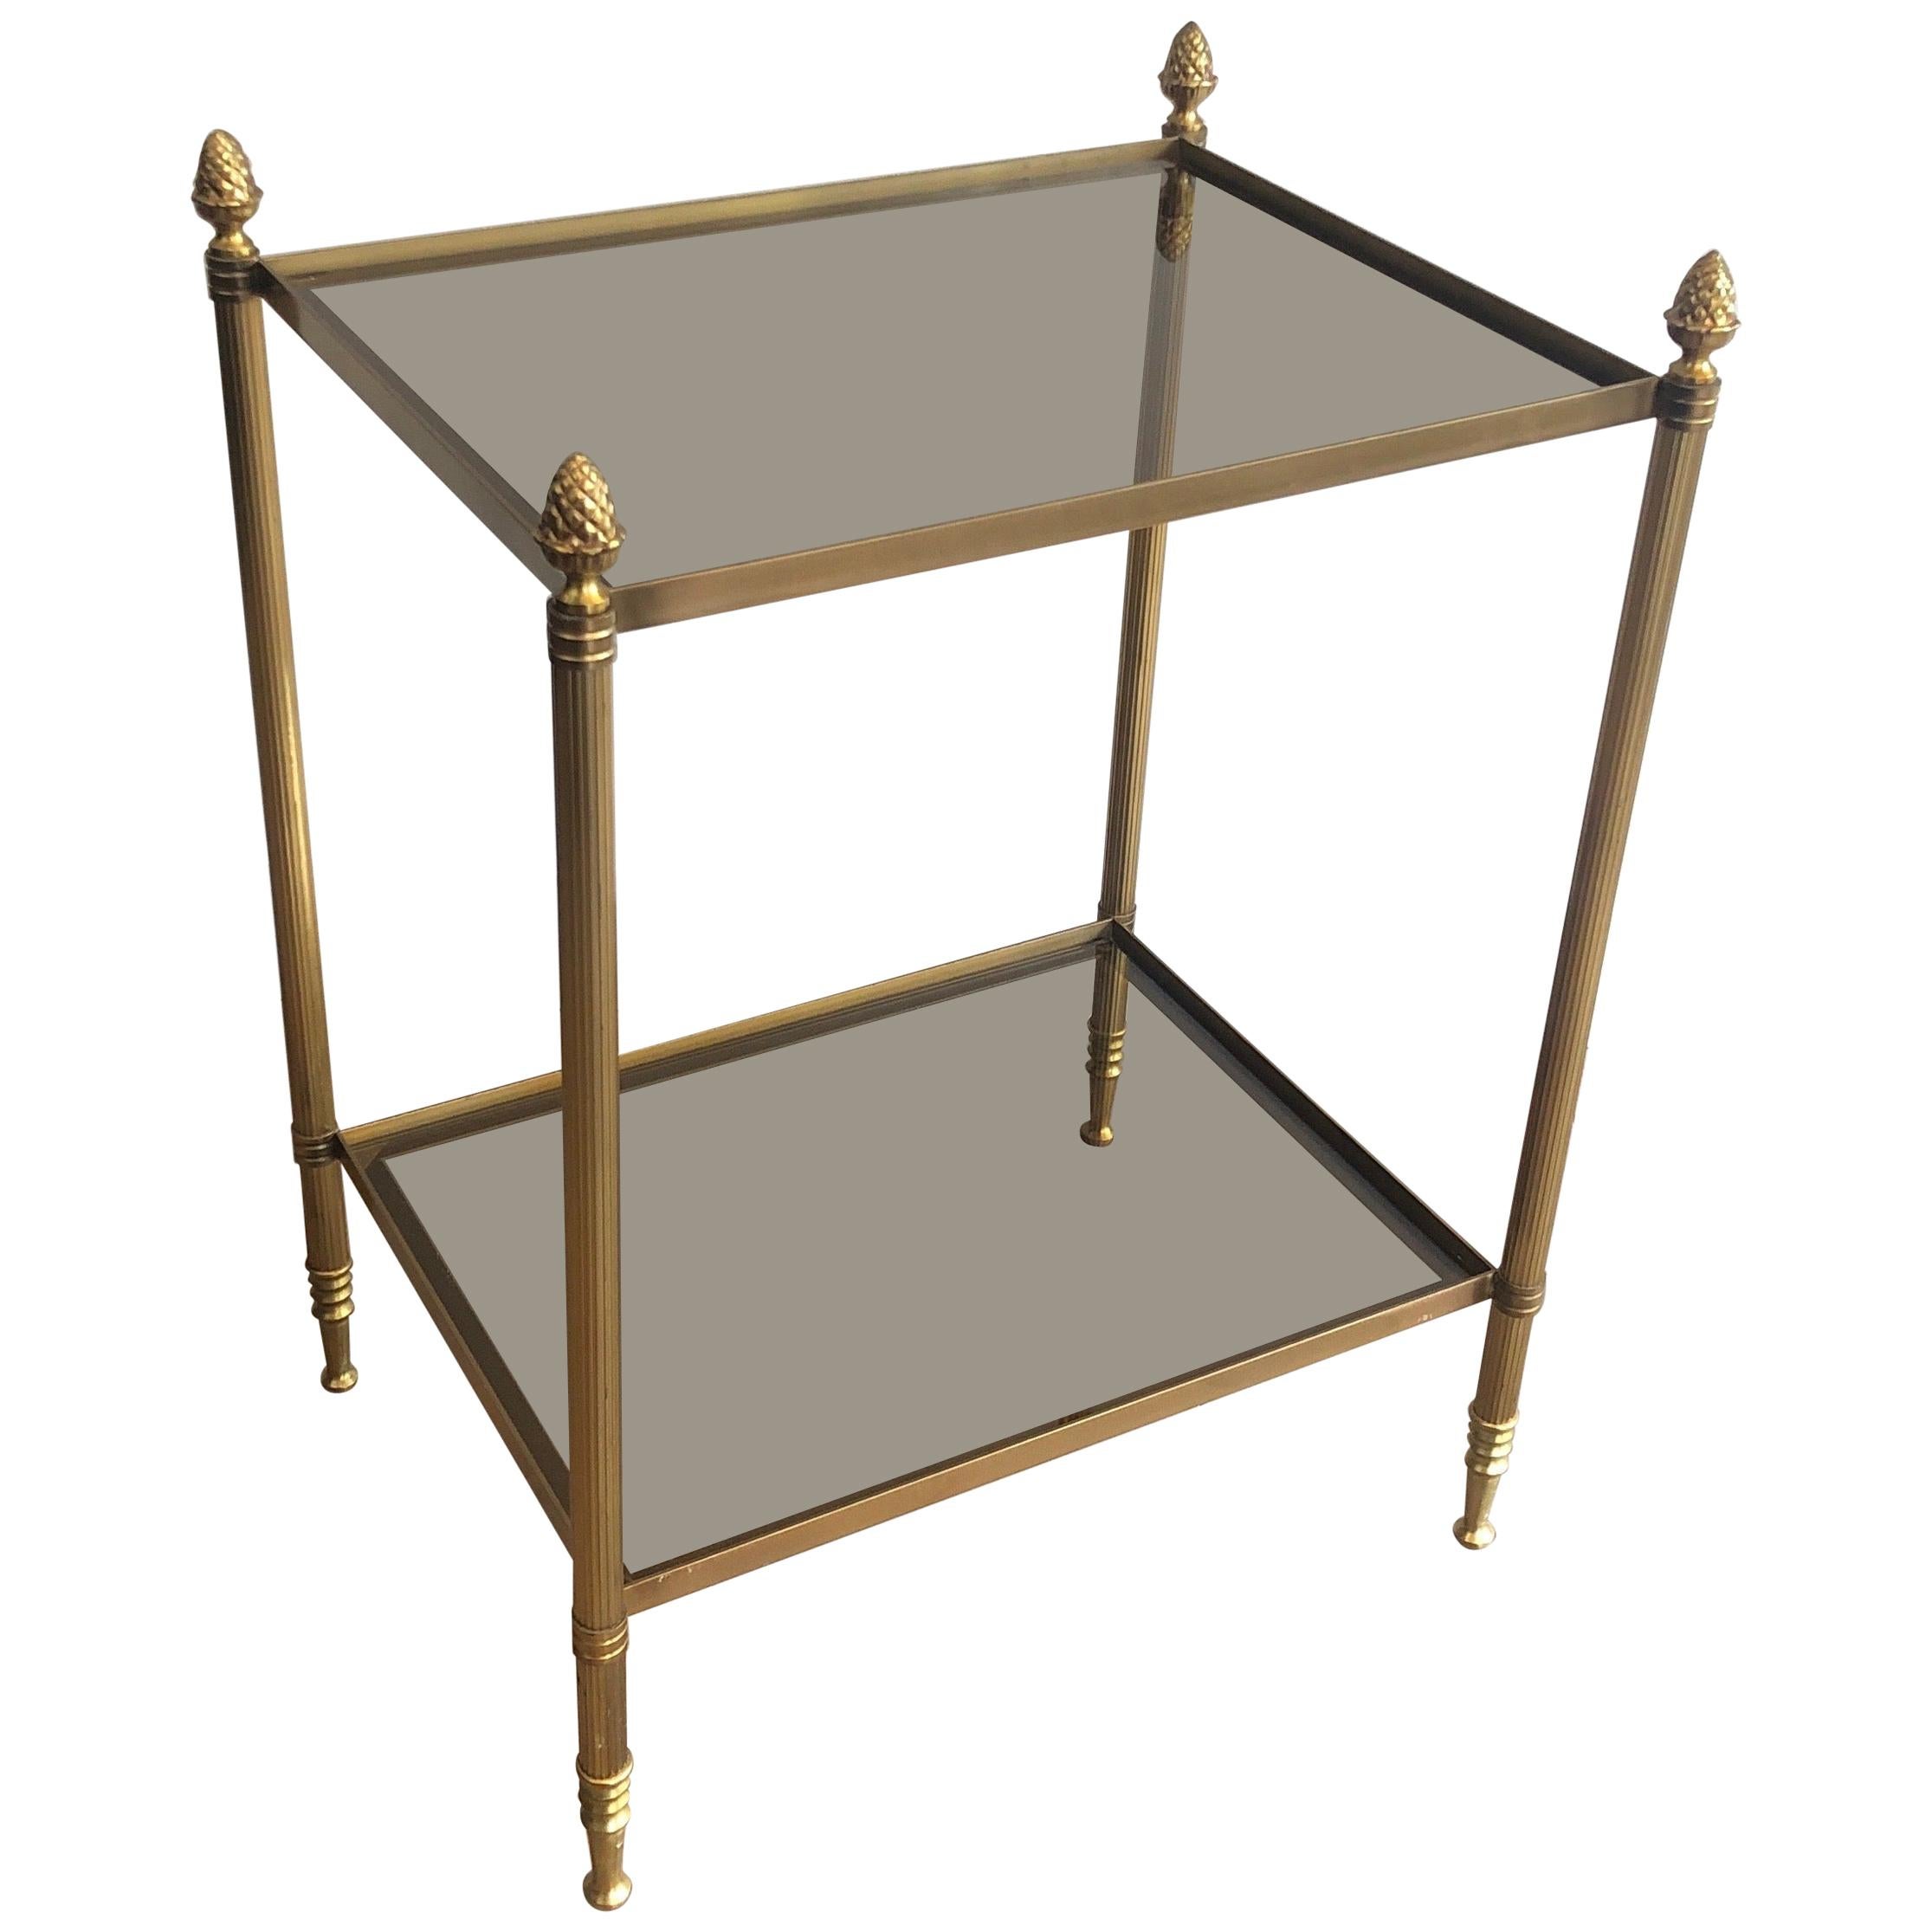 Maison Baguès, Brass Side Table with Smoked Glass Shelves, French, circa 1940